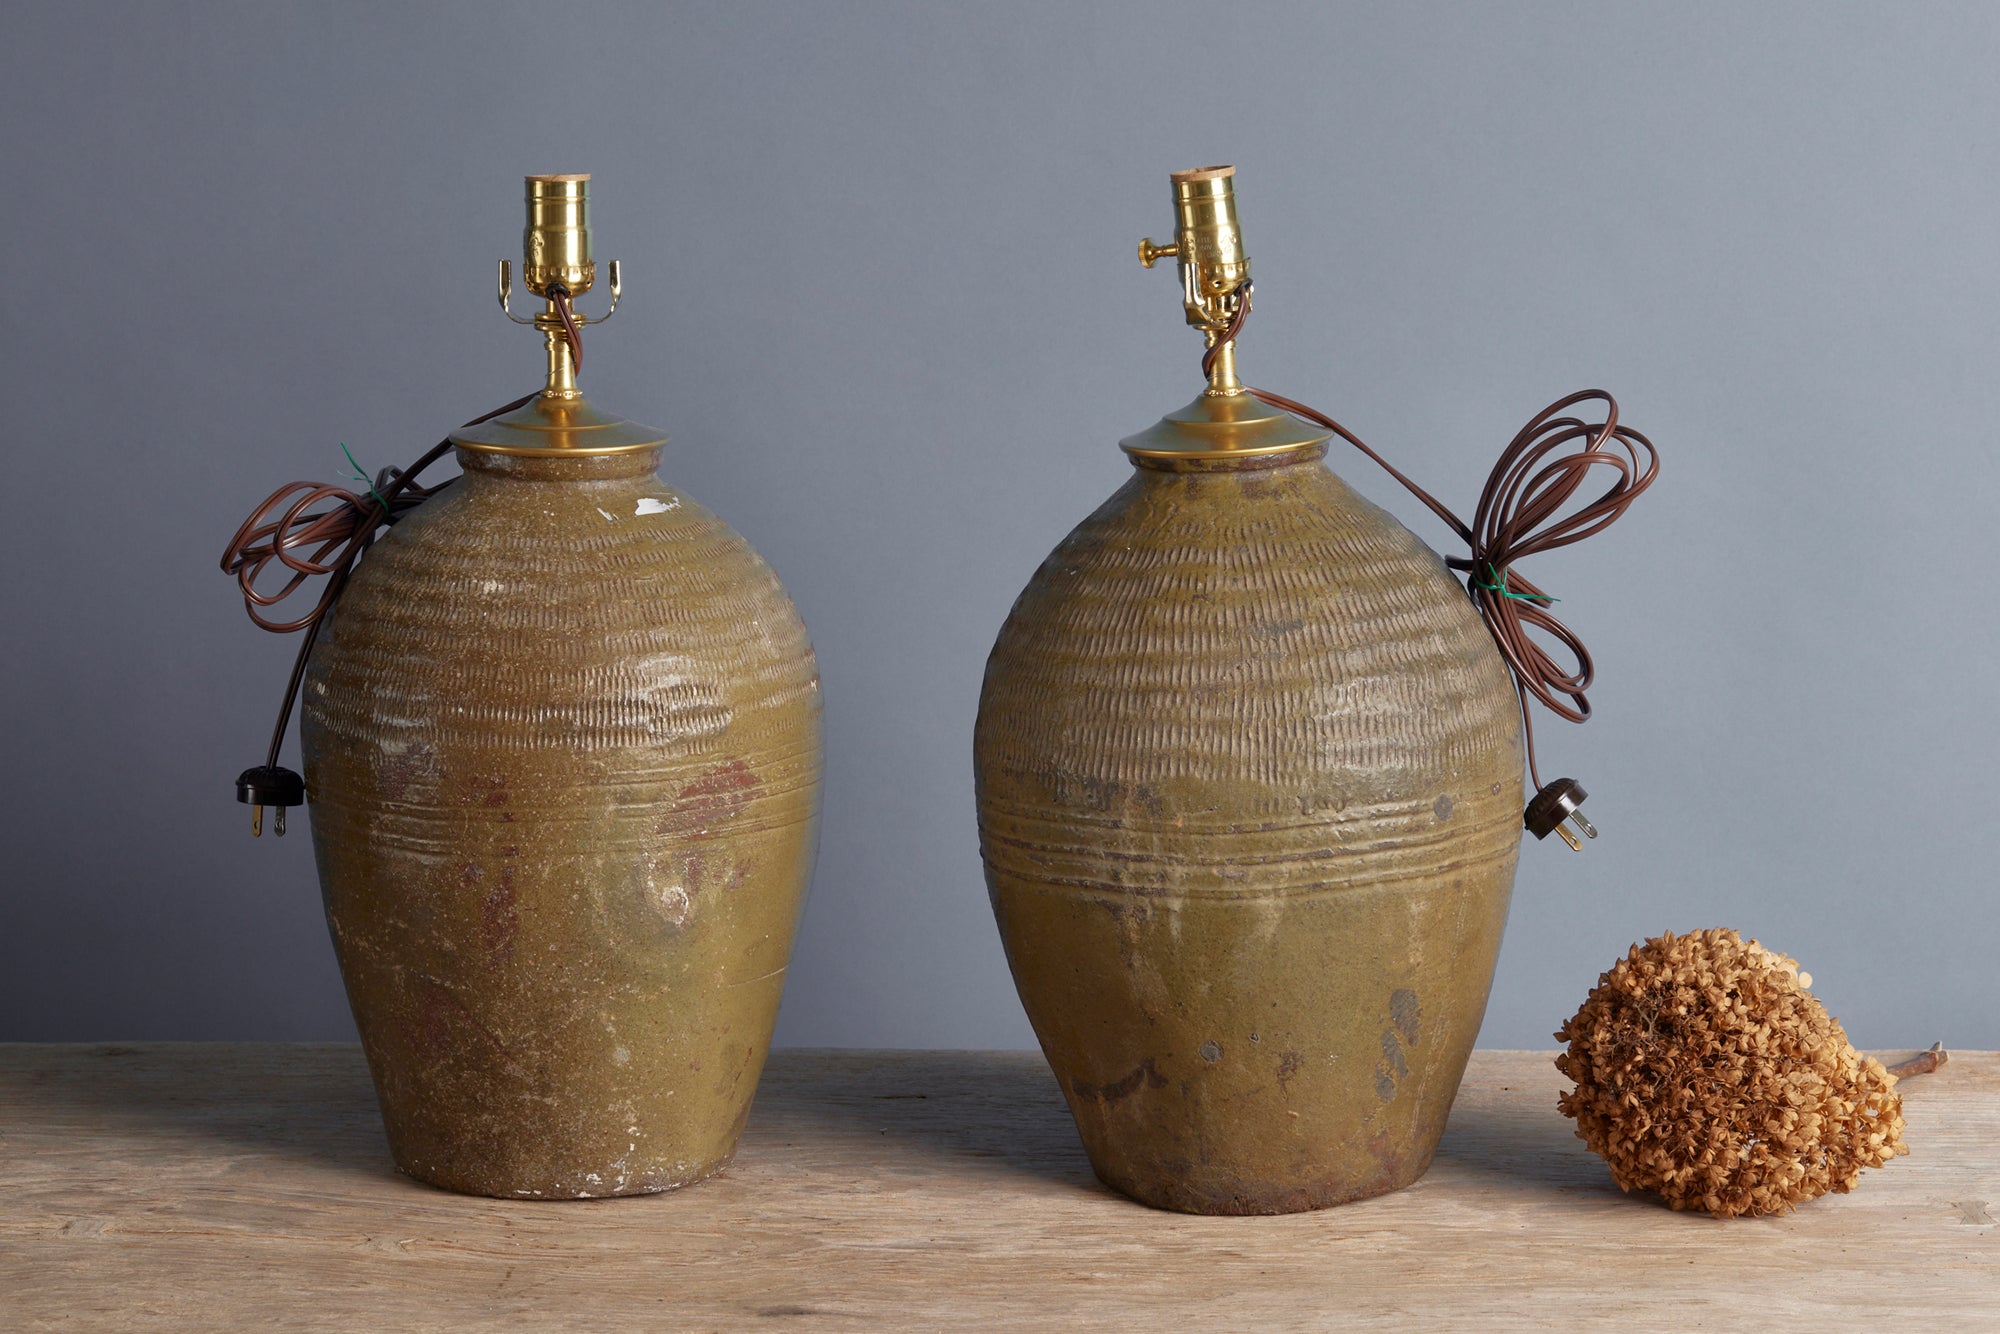 Glazed Rice Wine Storage Jars from Mekong Valley in Laos Converted into Lamps